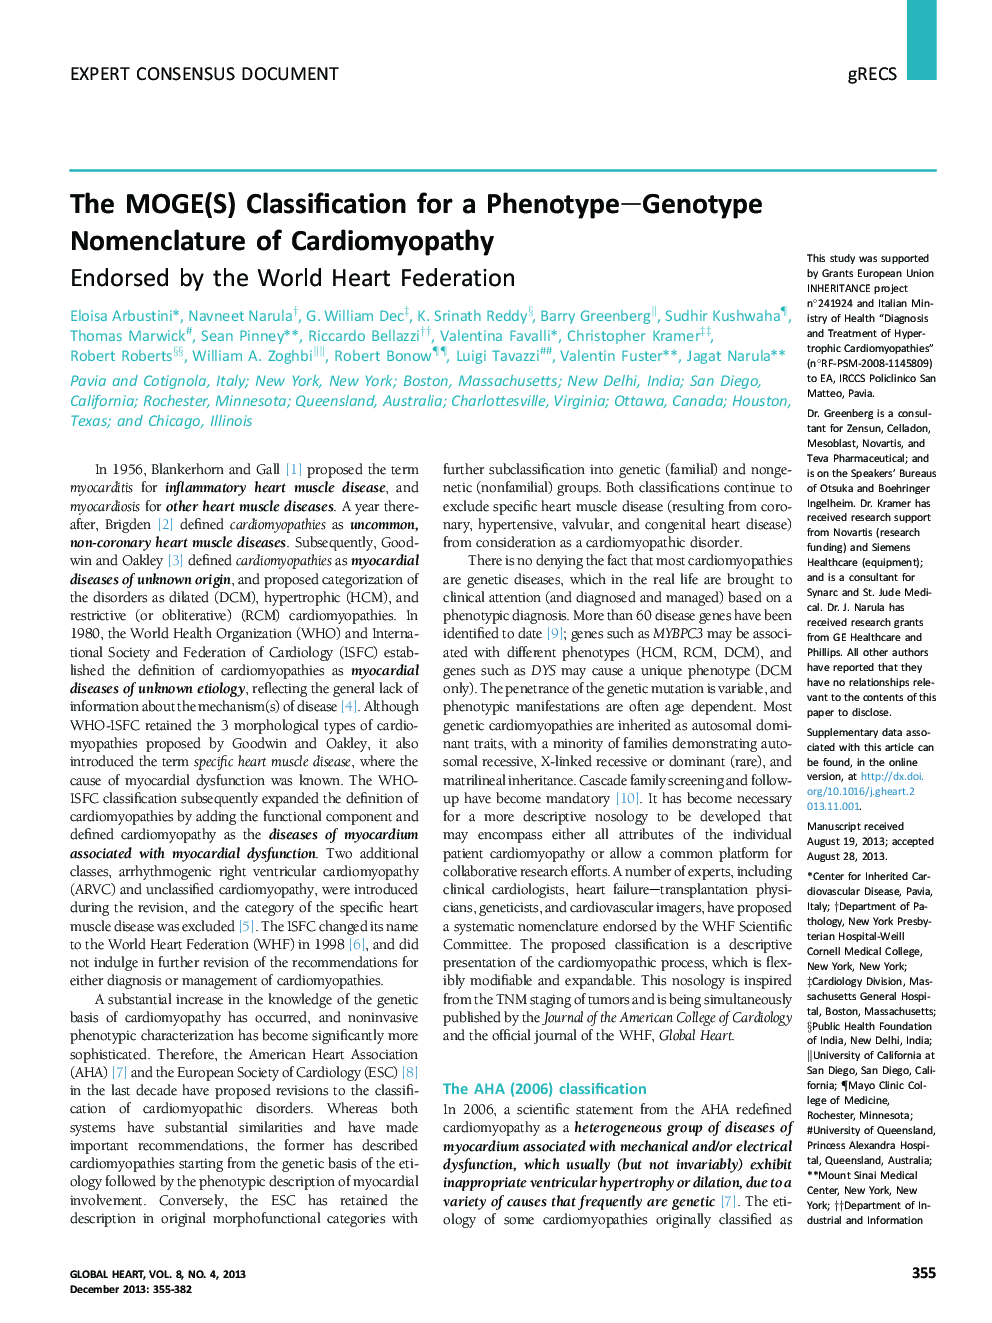 The MOGE(S) Classification for a Phenotype-Genotype Nomenclature of Cardiomyopathy